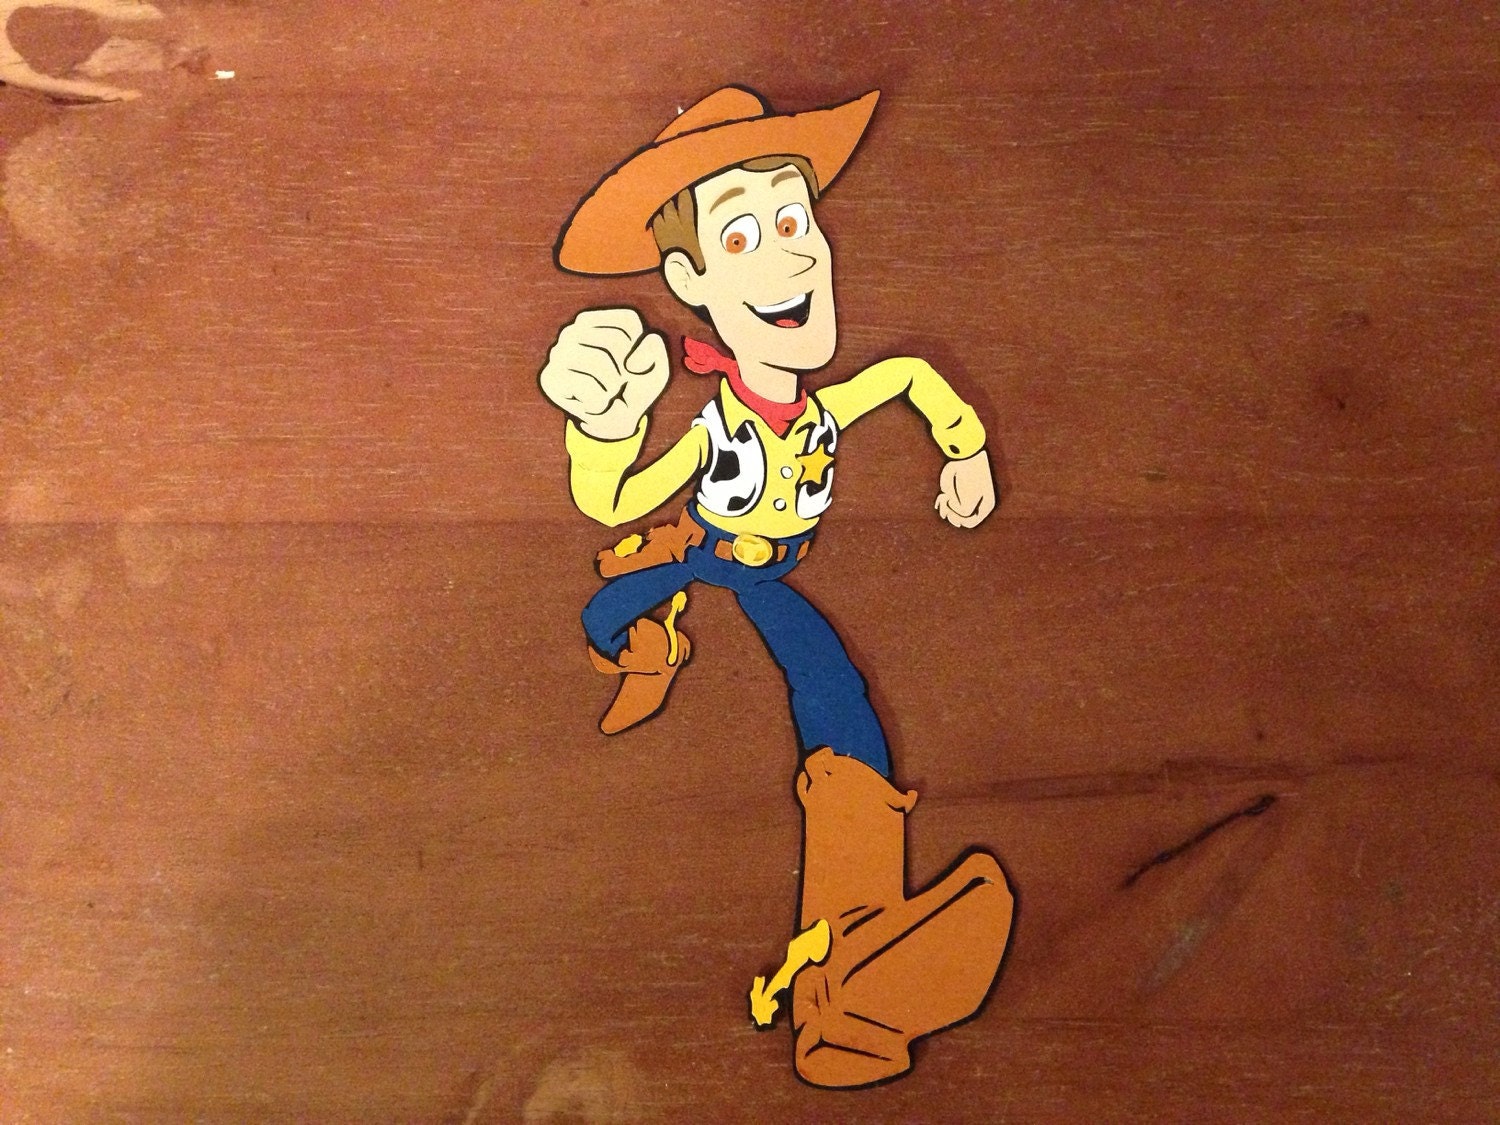 Toy Story's Woody character die cut